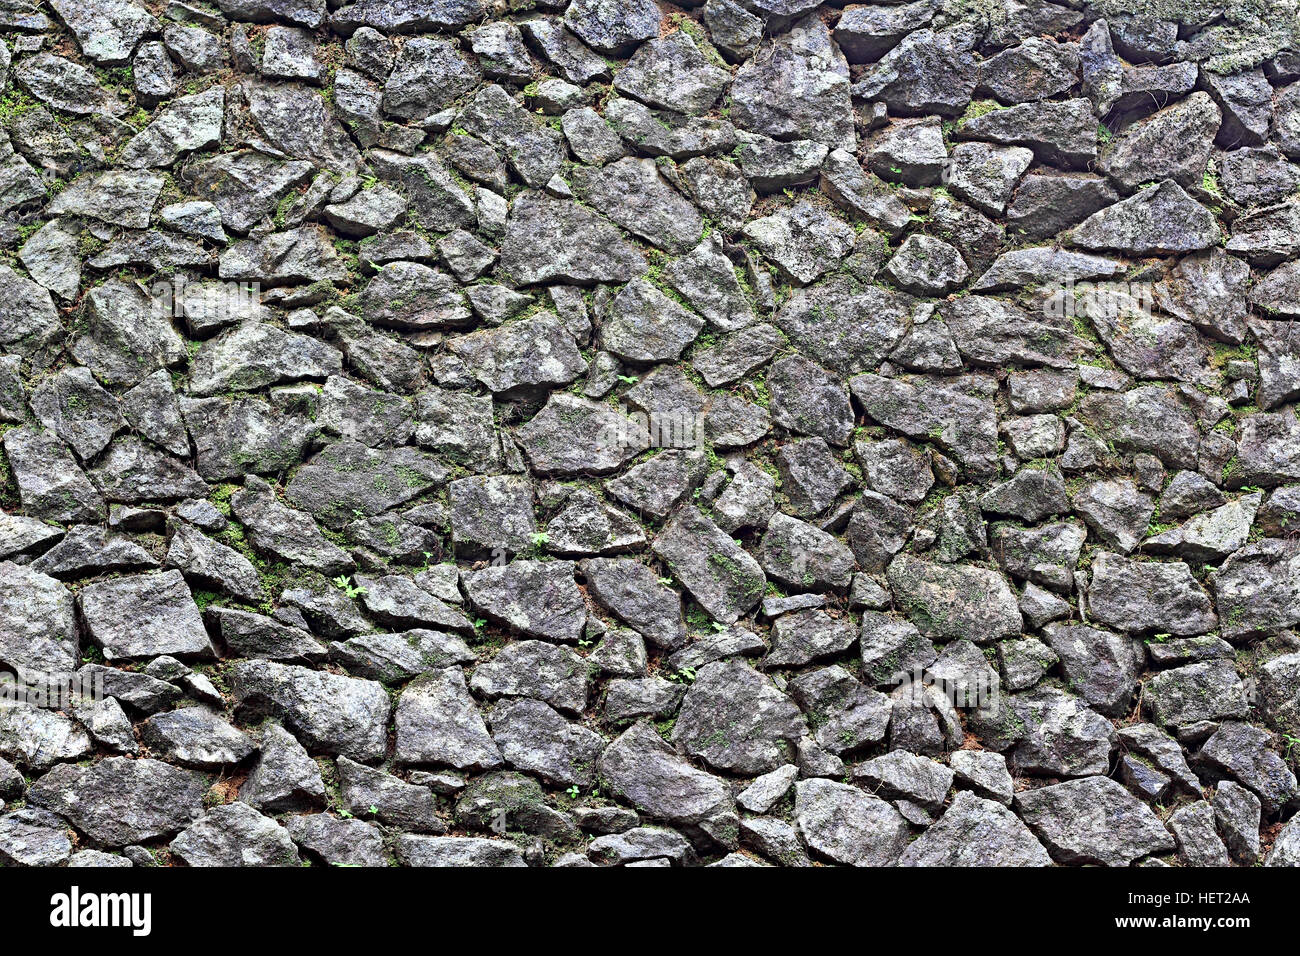 Background texture of wall face with rough granite stone pieces Stock Photo